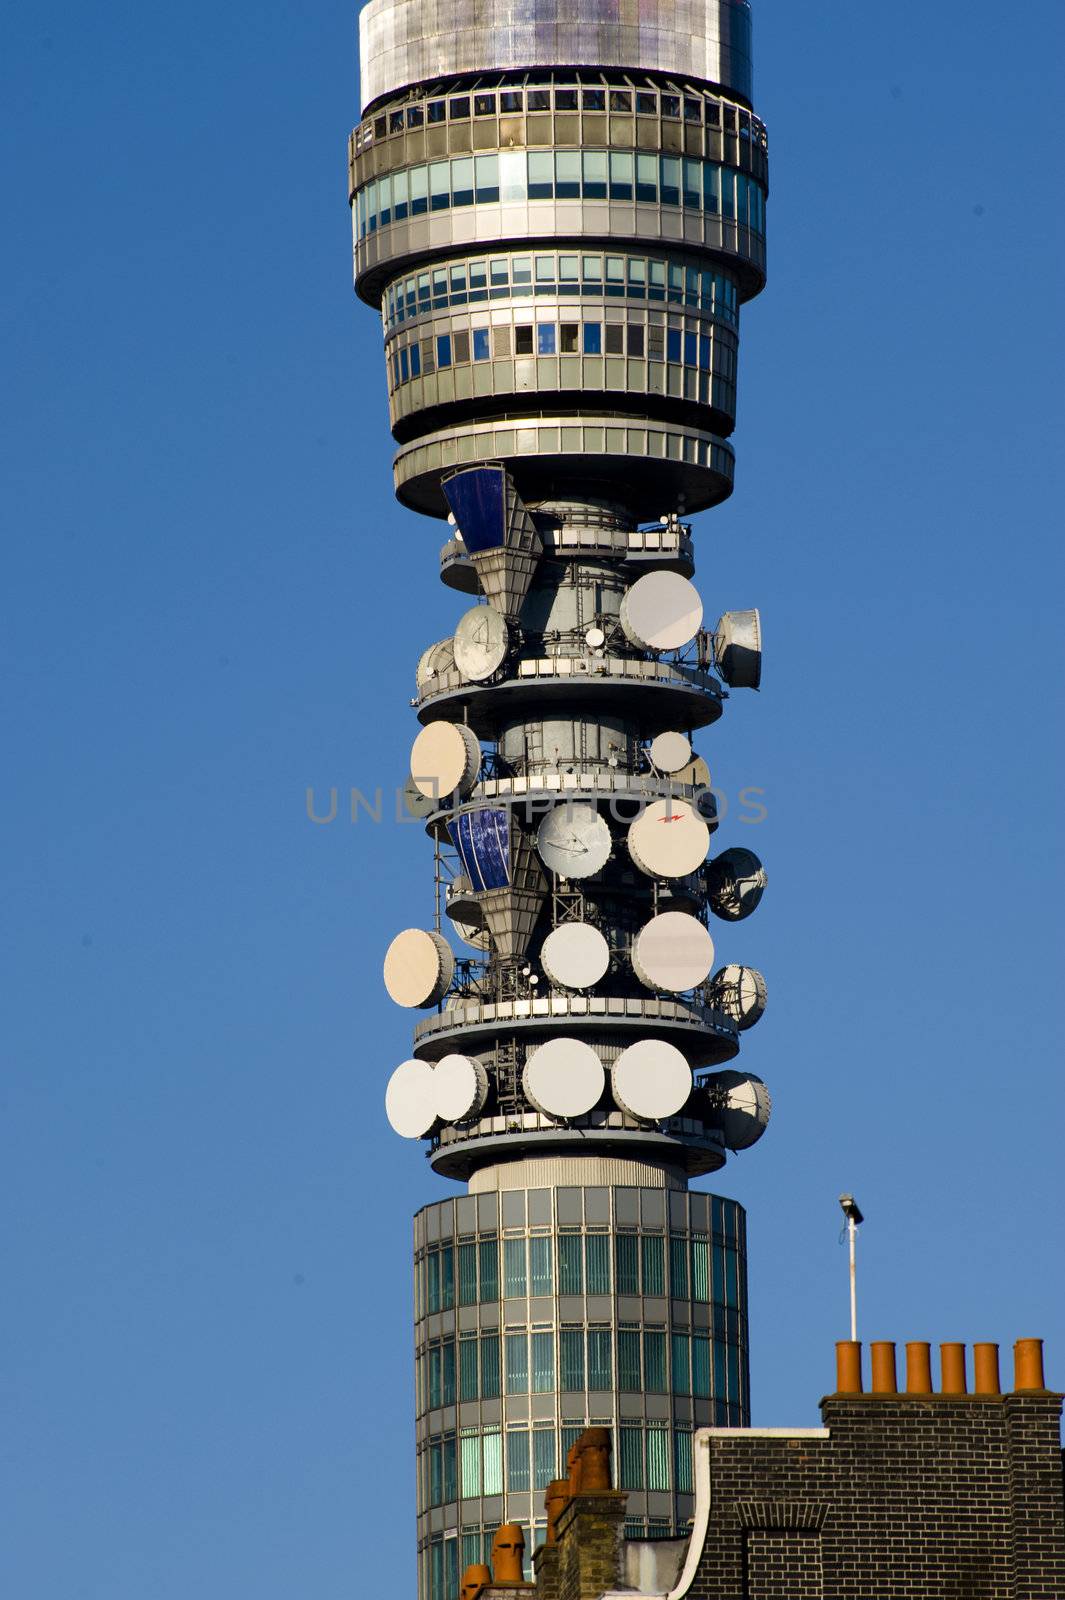 Central television antena in the London, UK